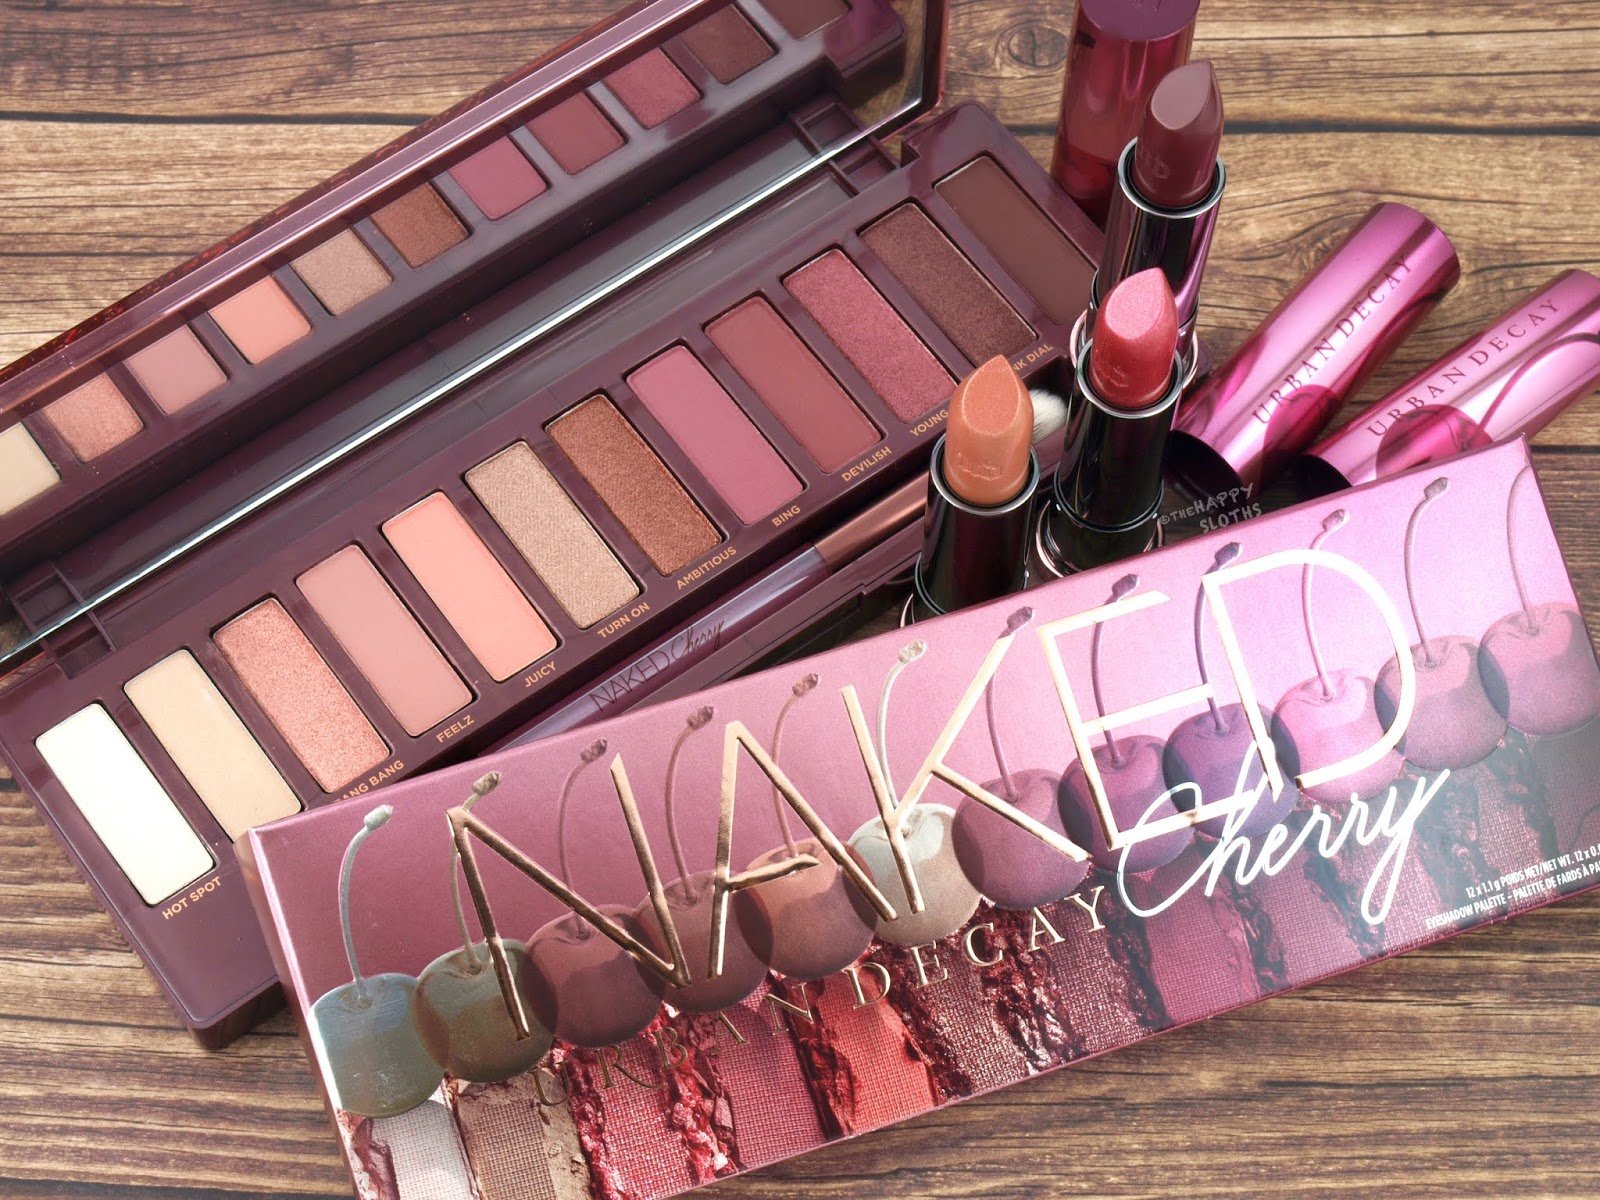 Urban Decay Naked Cherry Collection Review - The Beautynerd